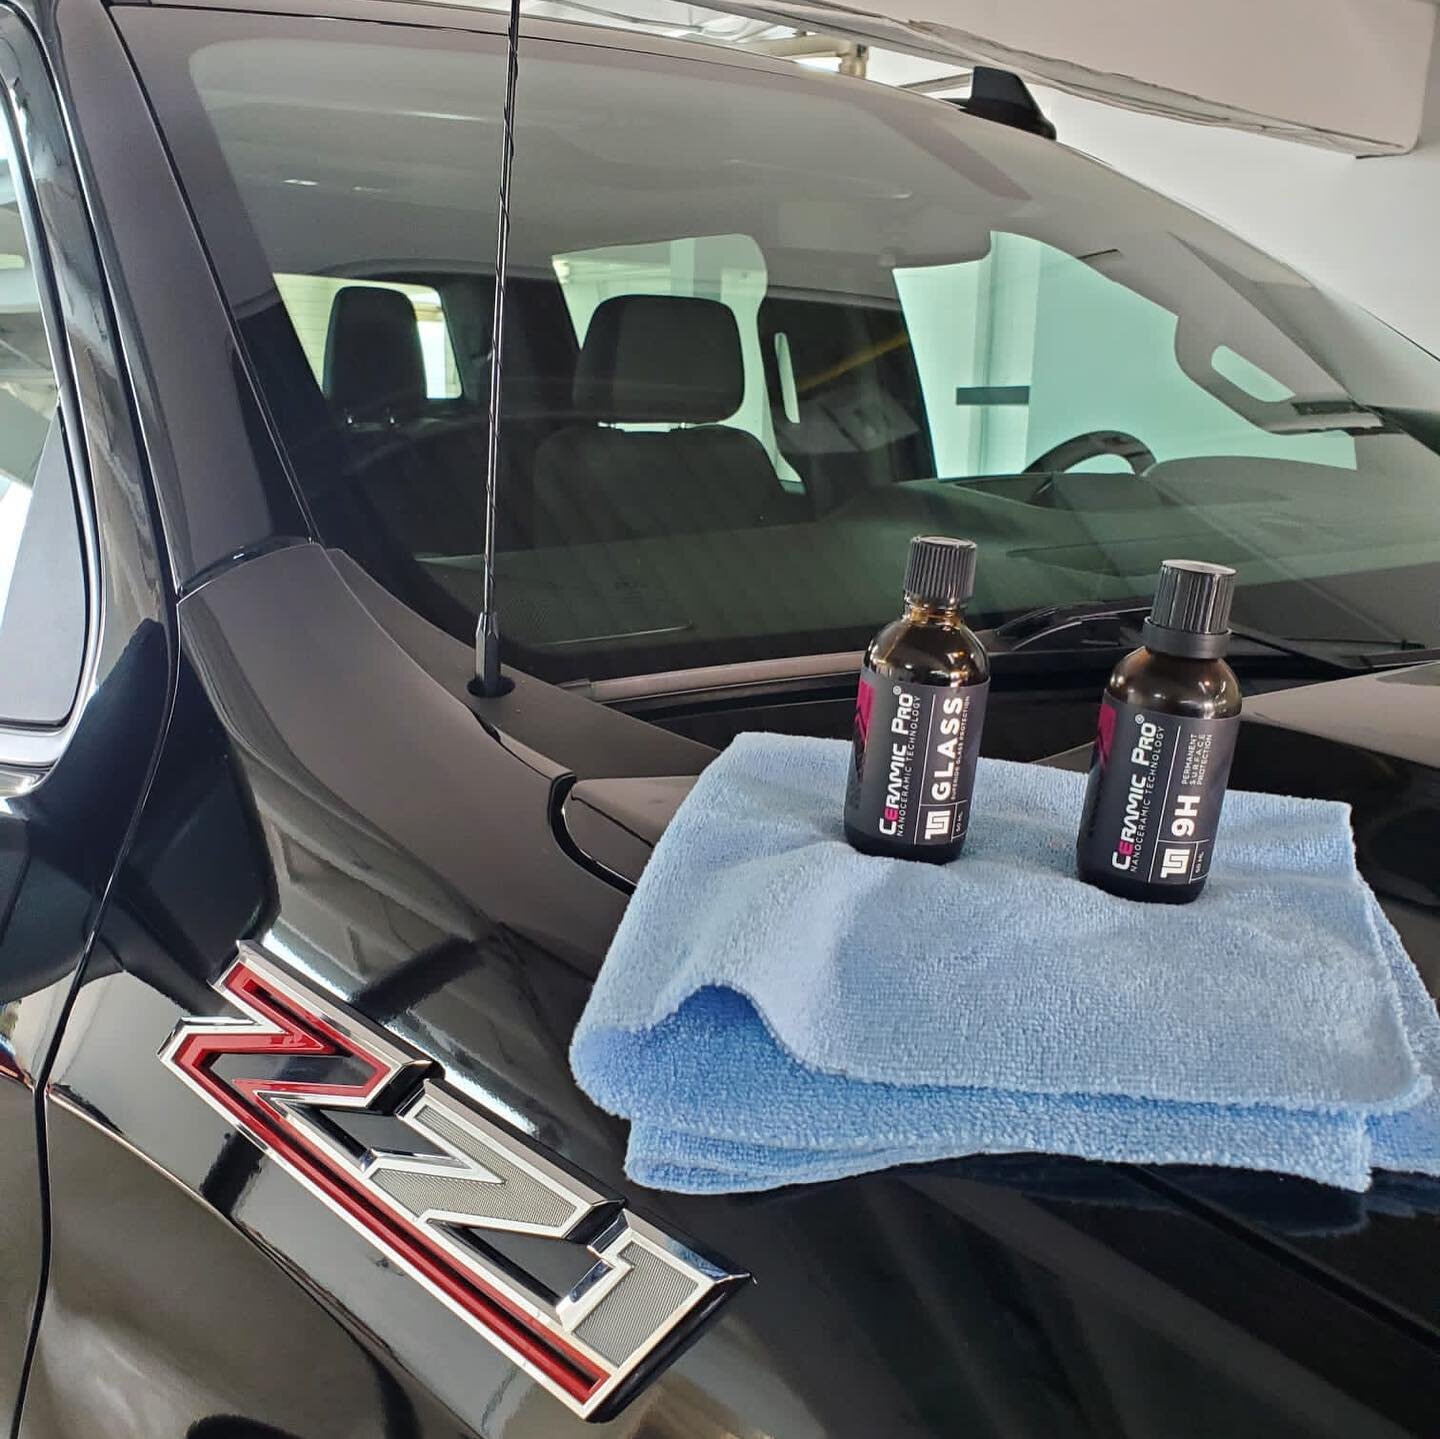 Certified Ceramic Pro Installers

Ceramic Pro is a multi-layerable, clear, liquid nano-ceramic coating. When cured, this technology will transform itself on the surface to a permanent, durable yet flexible glass shield. Ceramic Pro can be described a